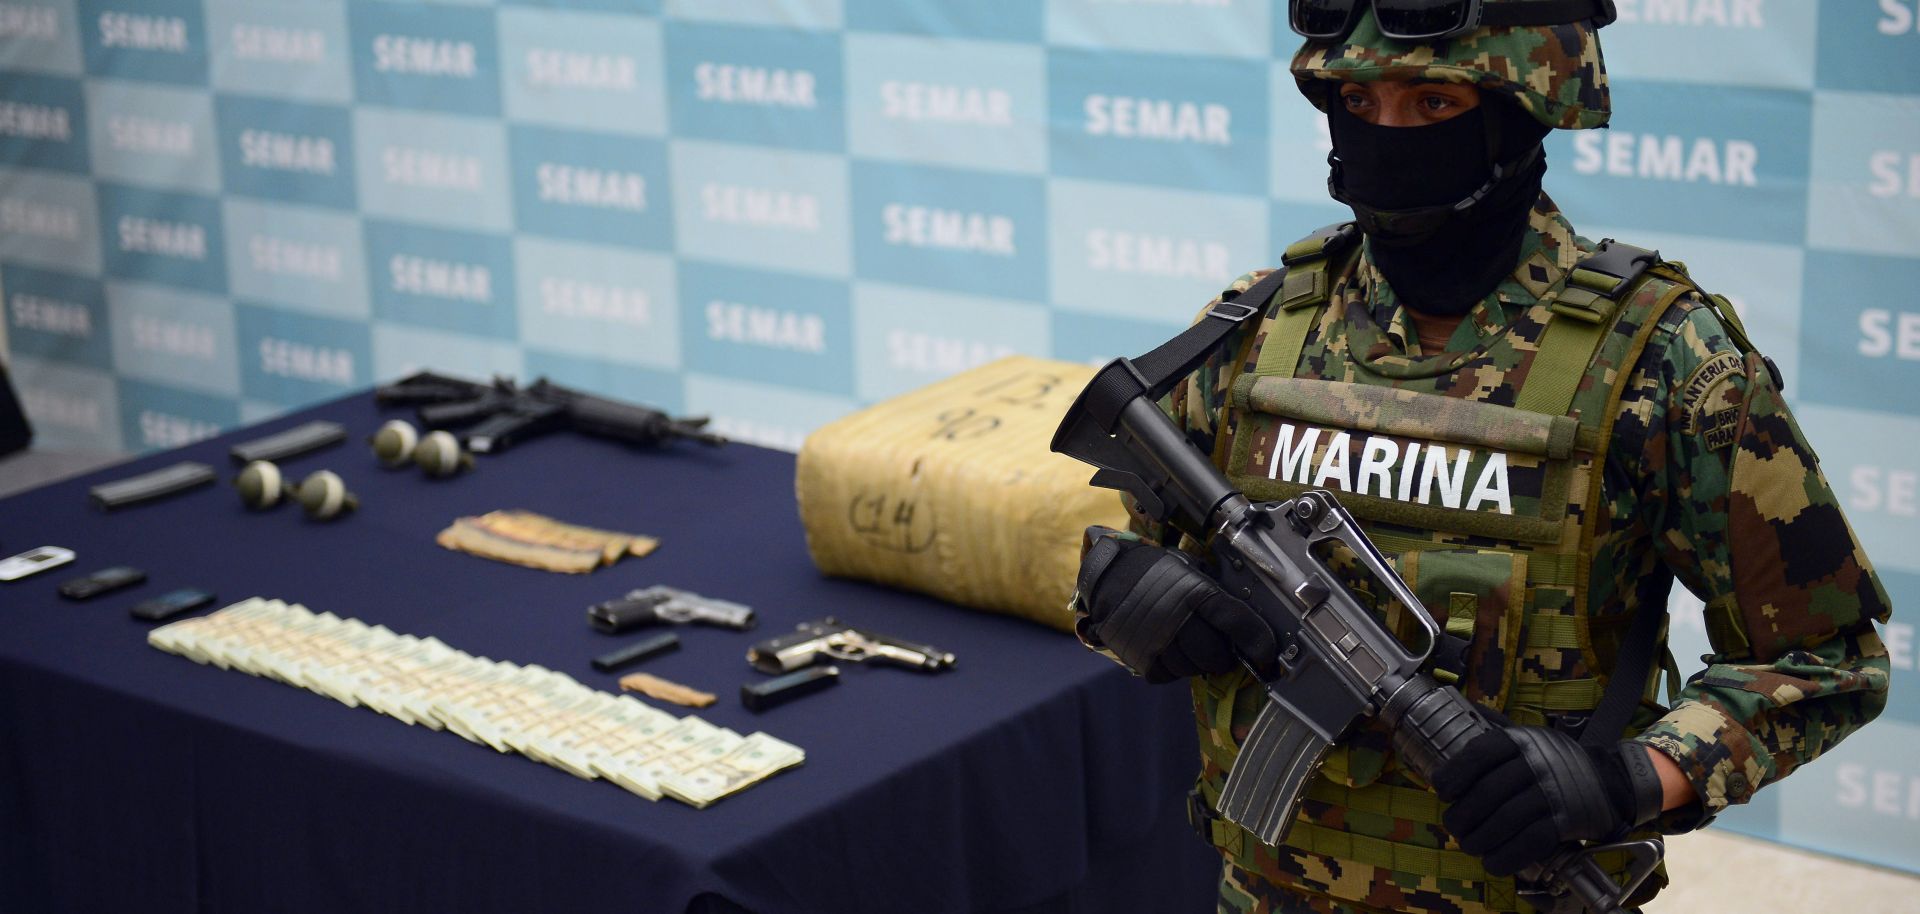 A soldier guards firearms, hand grenades and other illegal items seized from the Zeta drug cartel.